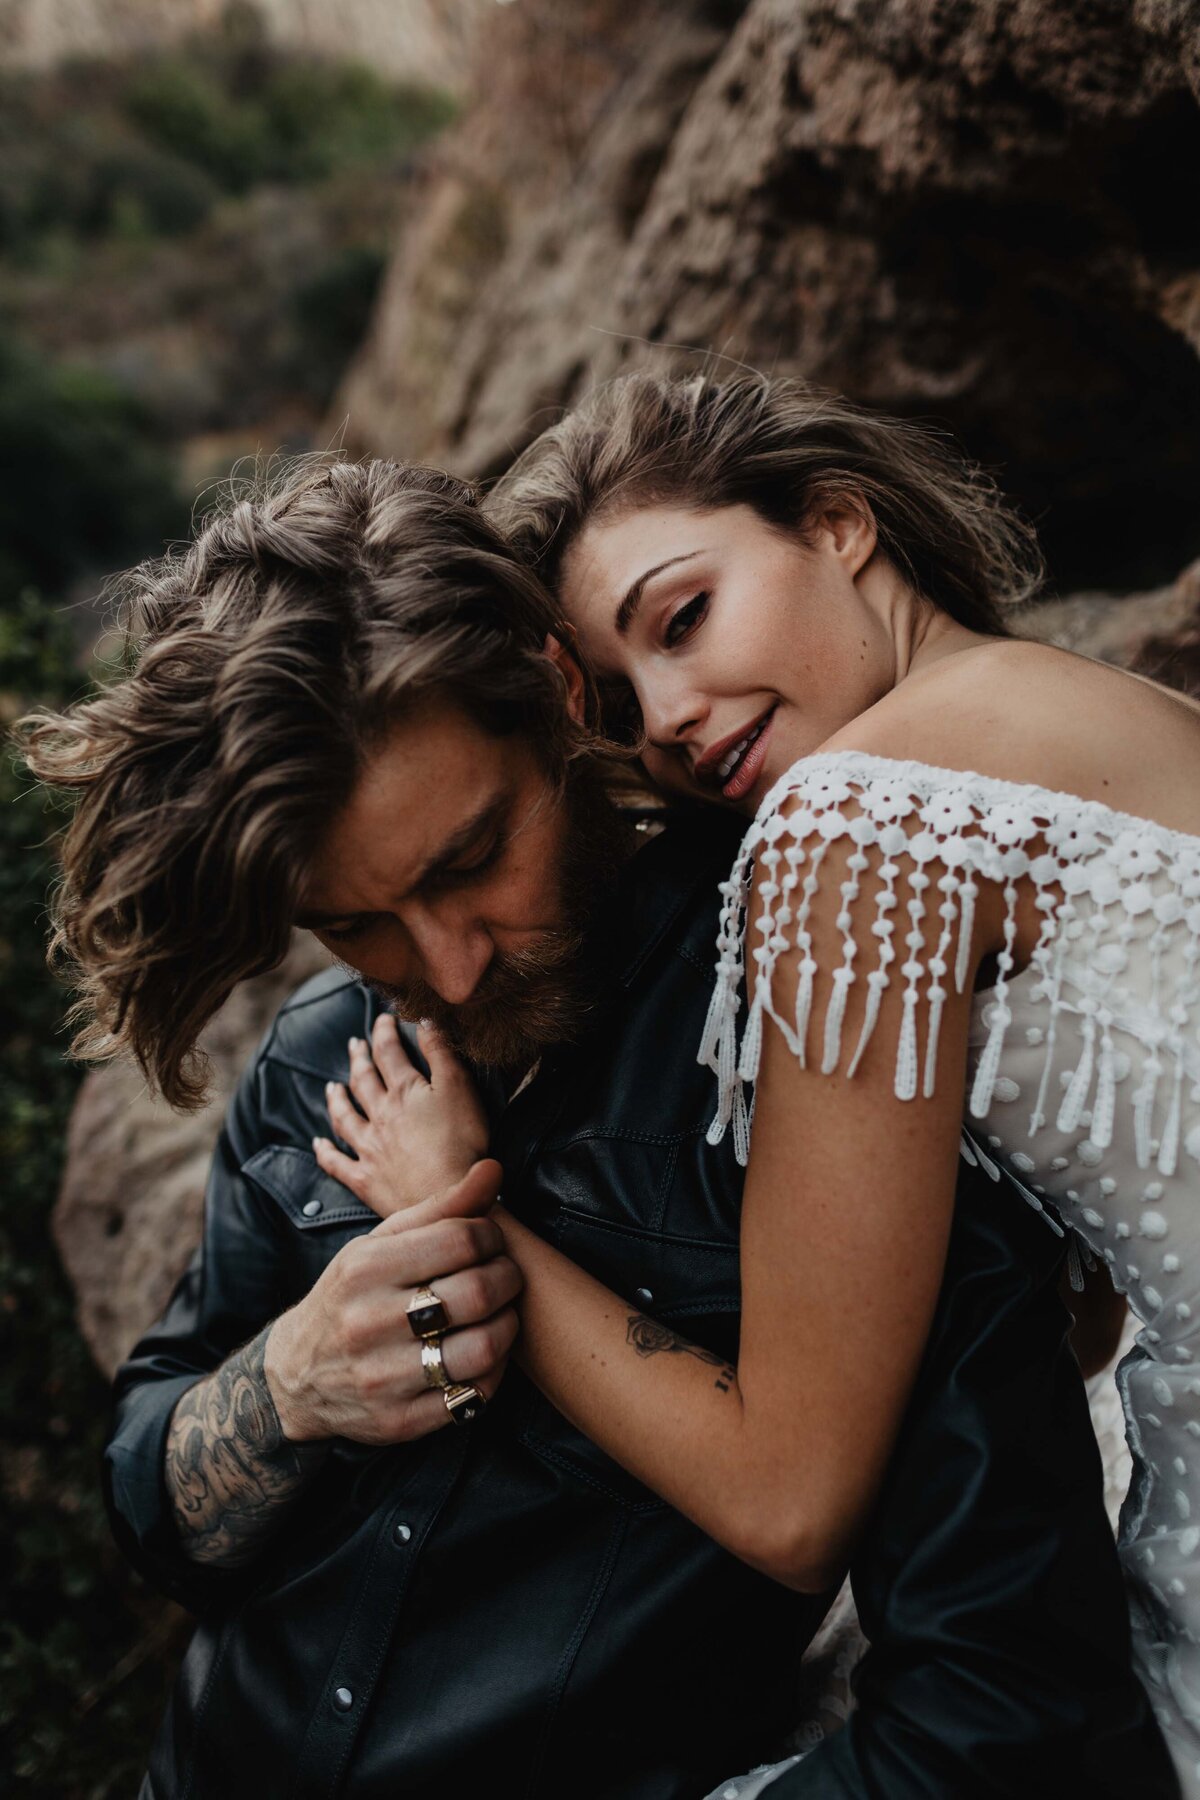 Adventure elopement at Malibu Creek State Park in the Santa Monica Mountains of California photographed by Magnolia and Ember.